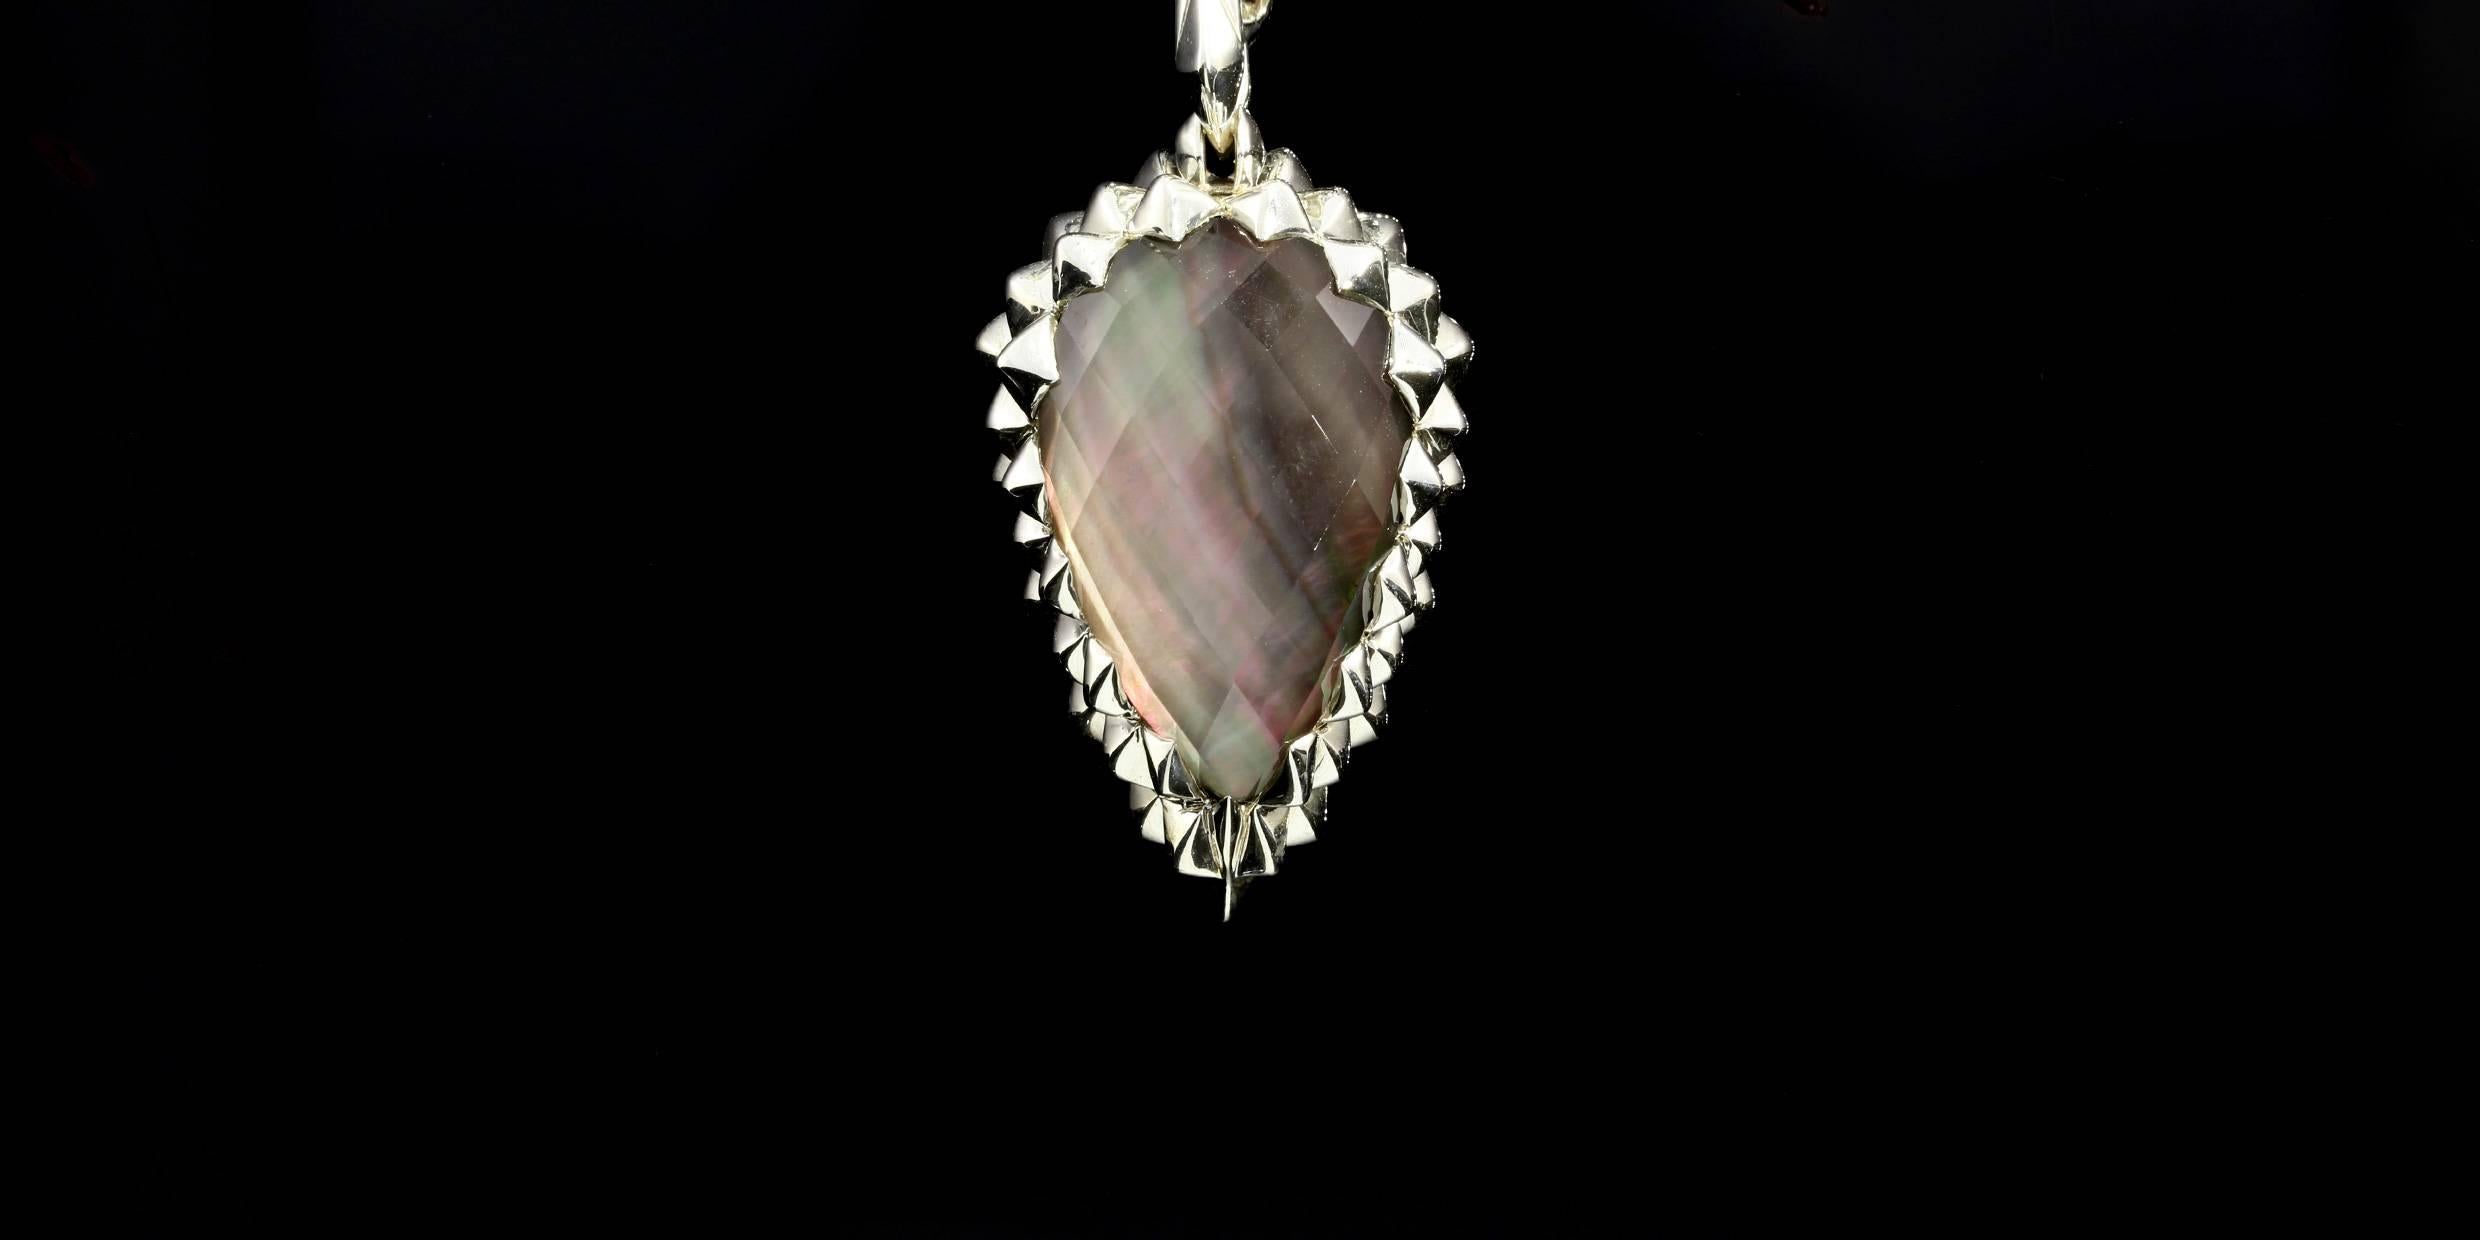 Stephen Webster has gained international acclaim for his exquisite & cutting edge designs. His designs are thought provoking & unpredictable while always celebrating traditional craftsmanship. This beautiful pear shaped necklace is from the